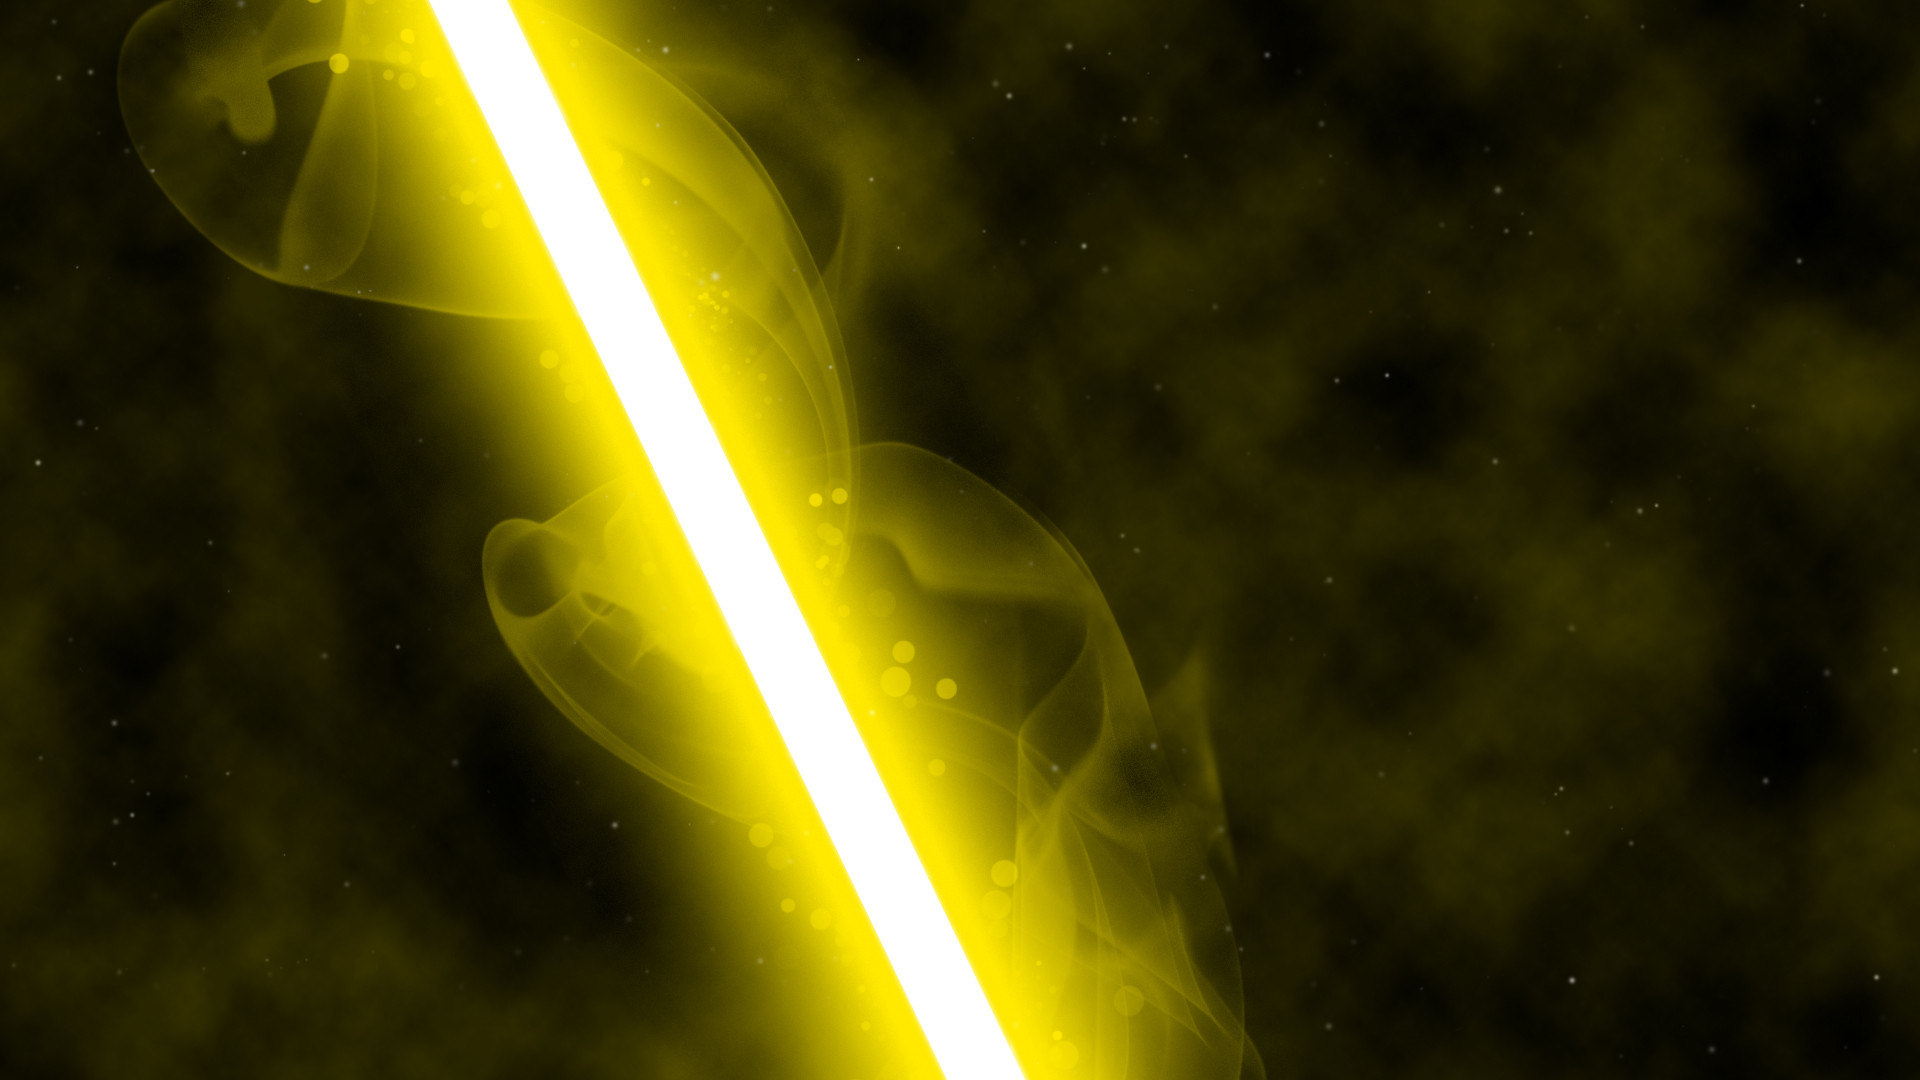 1920x1080 Blue Lightsaber Iphone Wallpaper : What color lightsaber are you? playbuzz